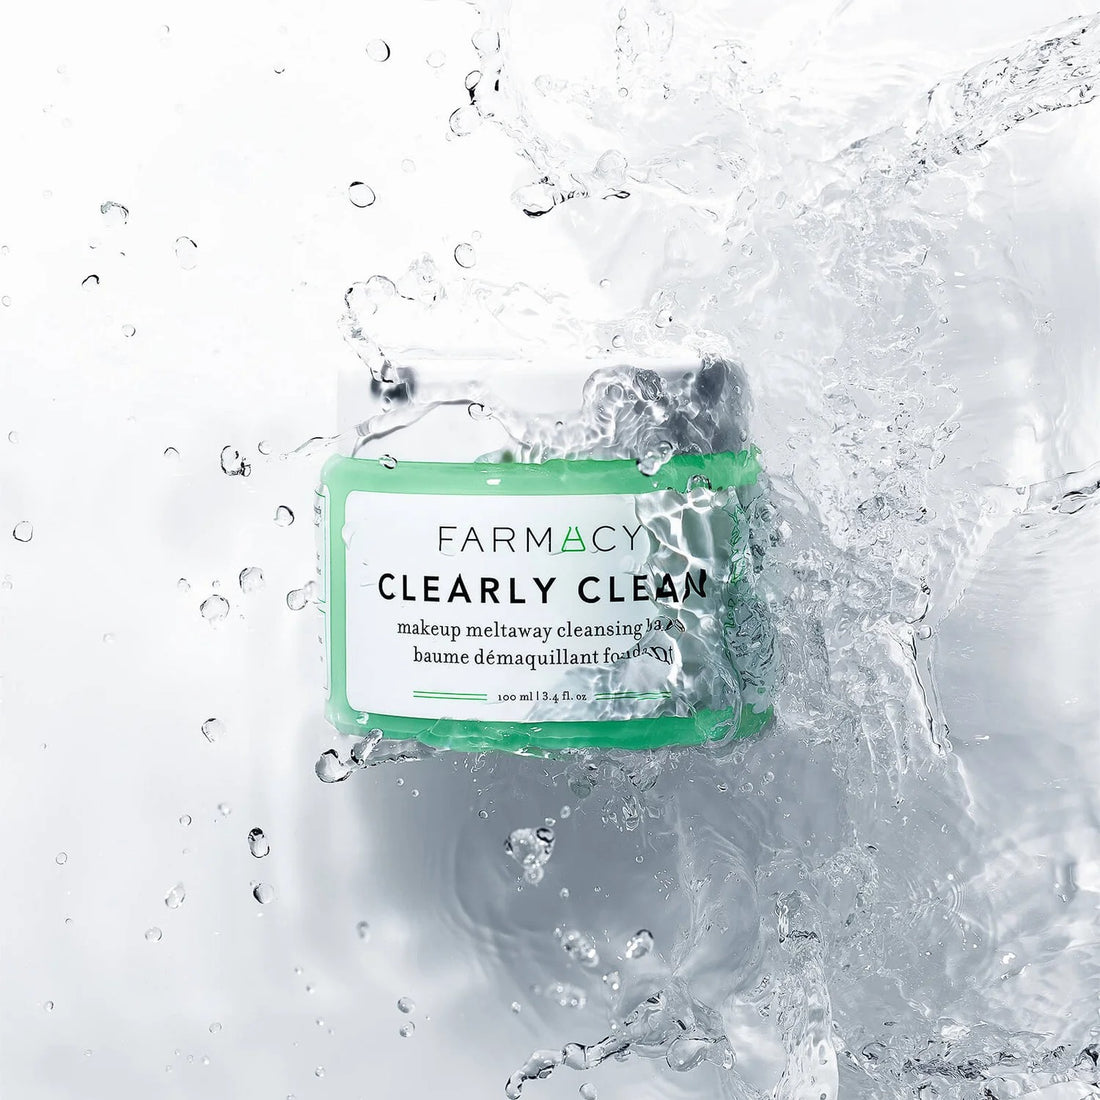 Farmacy Clearly Clean Makeup Meltaway Cleansing Balm